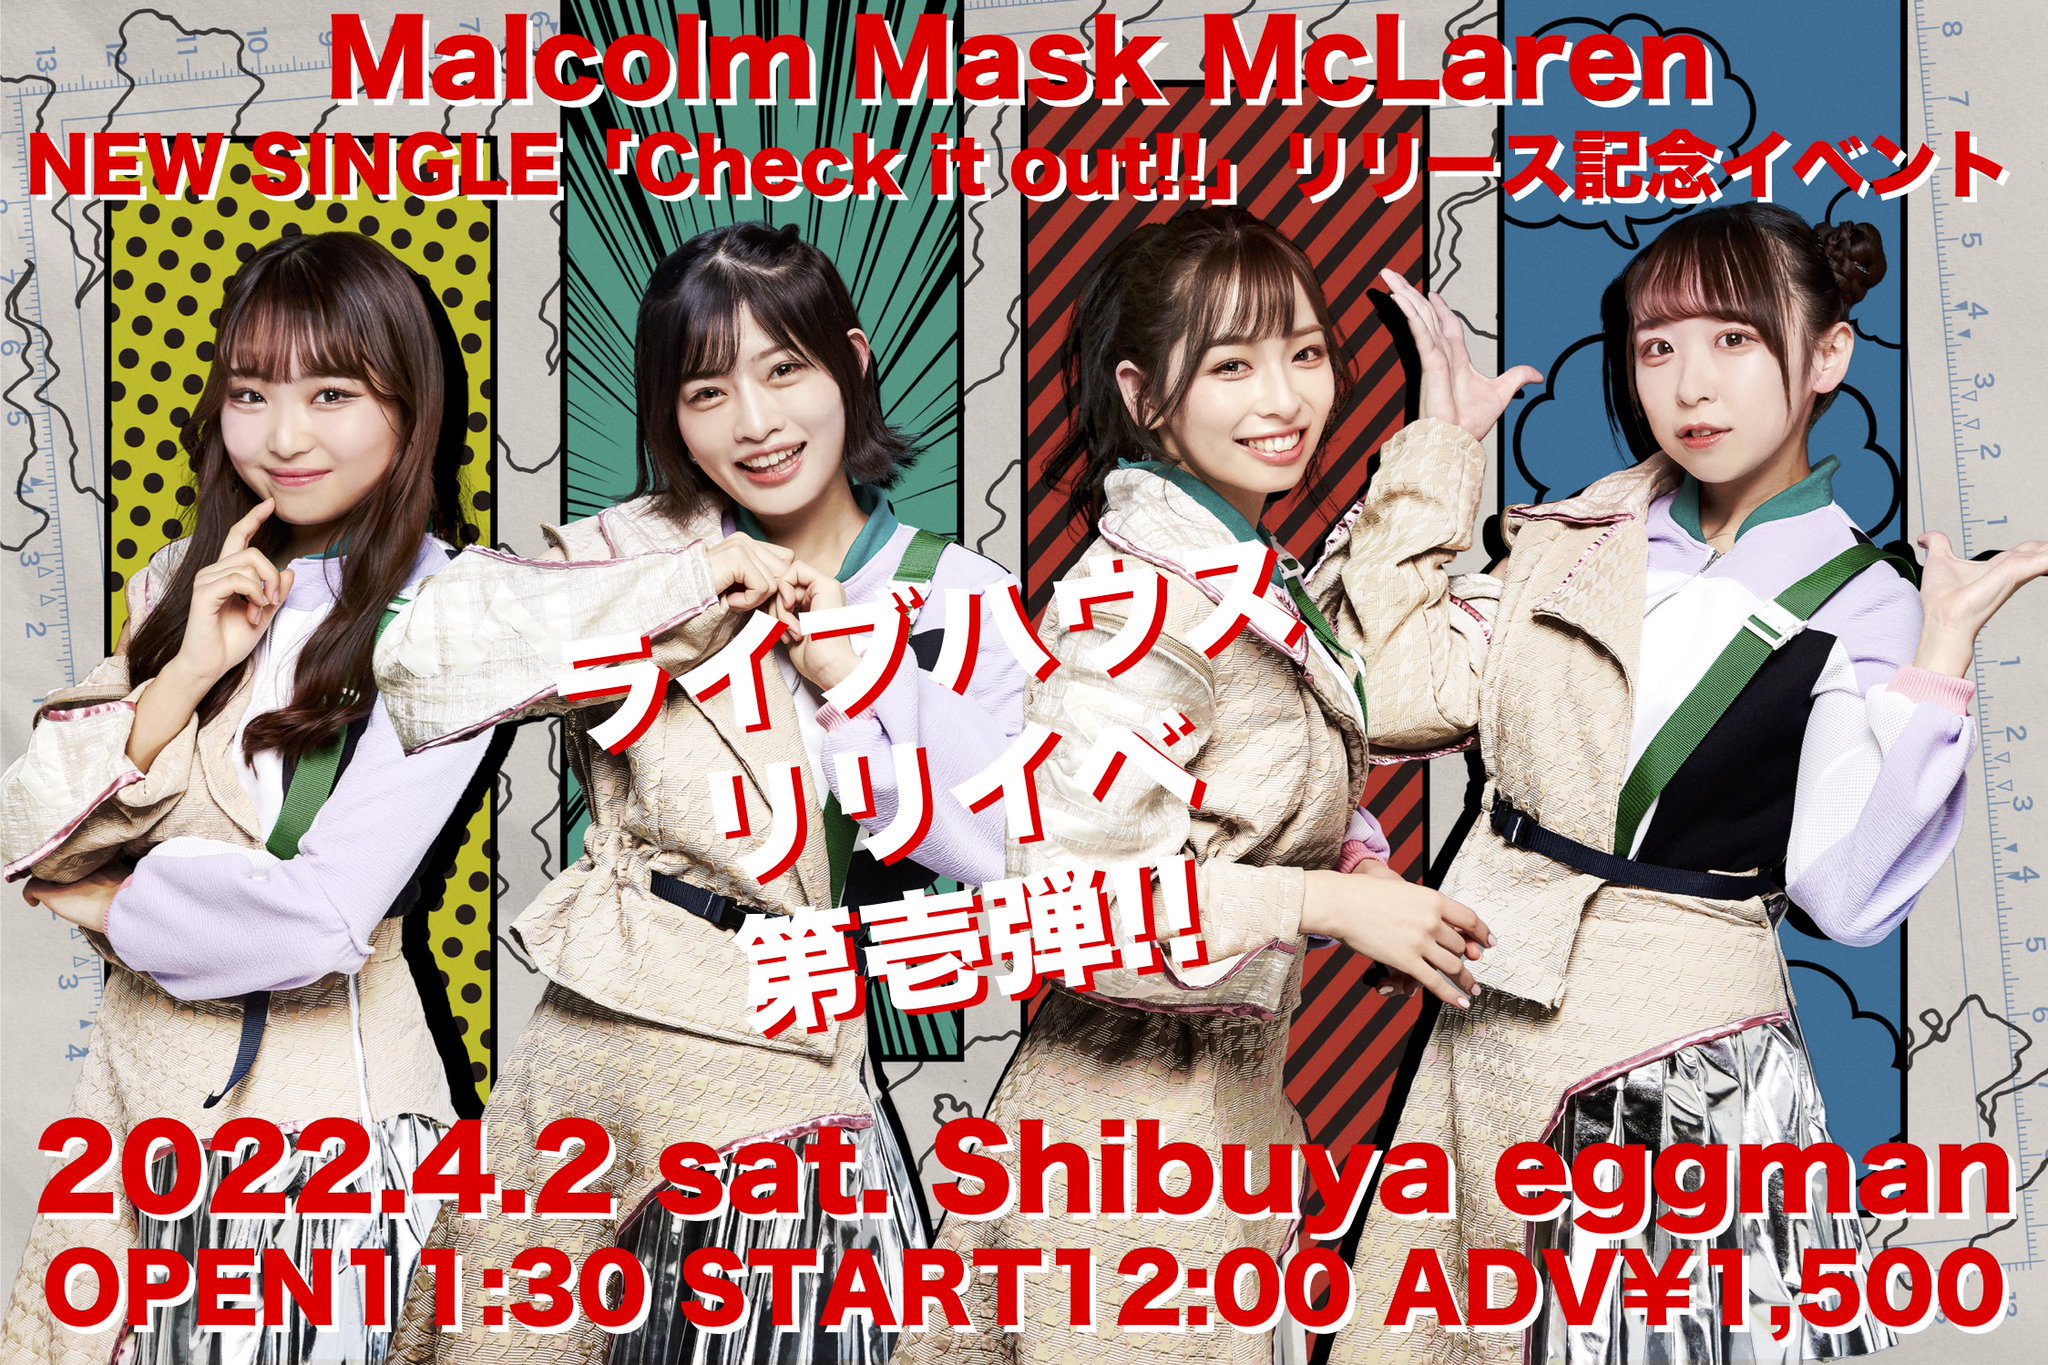 Malcolm Mask McLaren NEW SINGLE「Check it out!!」リリース記念イベント